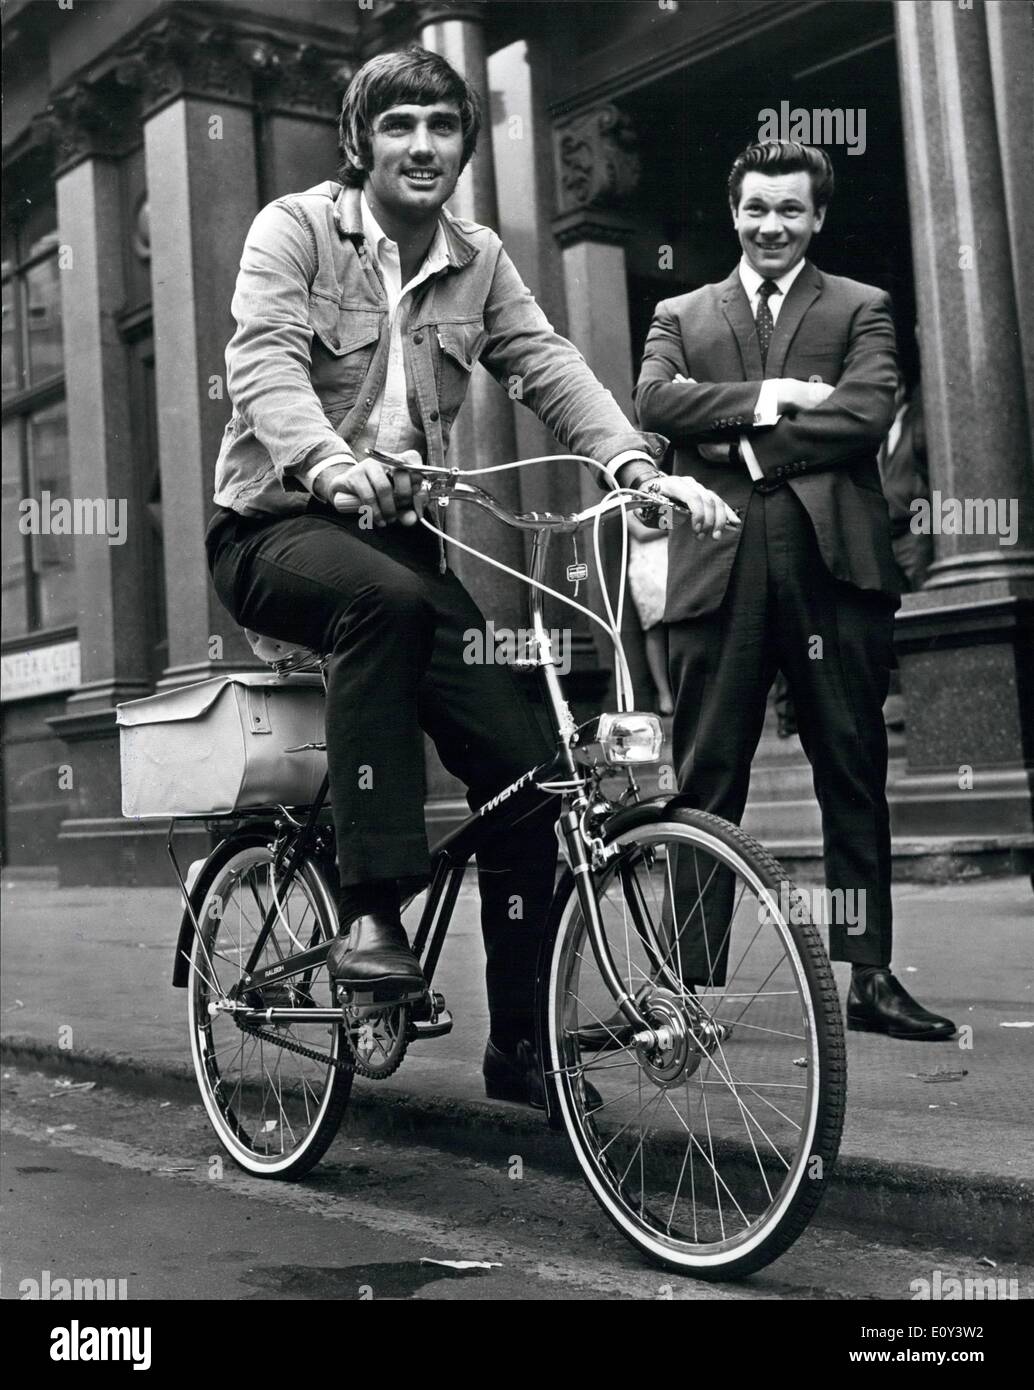 Jul. 07, 1968 - George Best - Banned From Driving For Six Months - Is Presented With A Bicycle: Banned from Arriving for six months by a Manchester court, Manchester United's ''Footballer of the Year'' George Best, is unperturbed. Yesterday he was presented with a bicycle to solve his transport problems. George received the cycle prior to a training spell at Old Trafford ground, and he rode up and down amongst the traffic to get used to the feel of his new machine. There is a large bag at the back for carrying his boots or anything else., such as fan mail Stock Photo